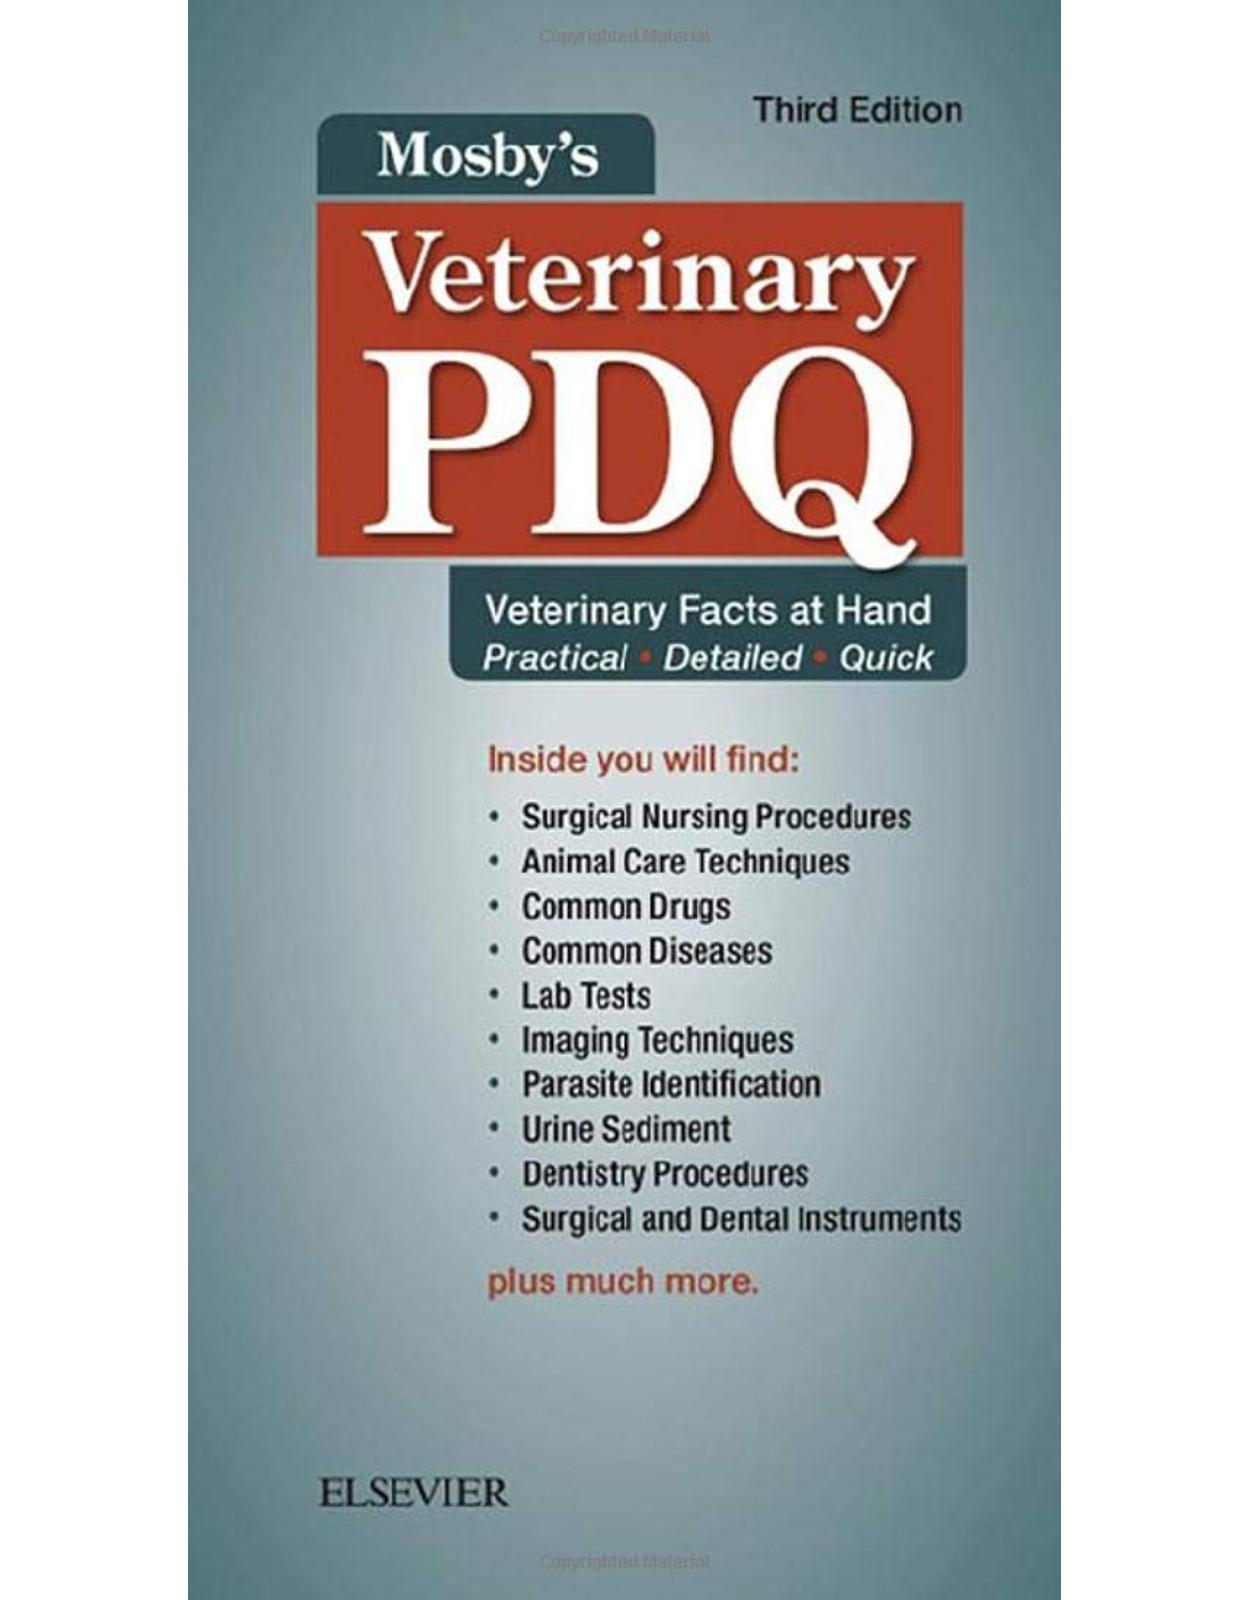 Mosby's Veterinary PDQ: Veterinary Facts at Hand, 3e